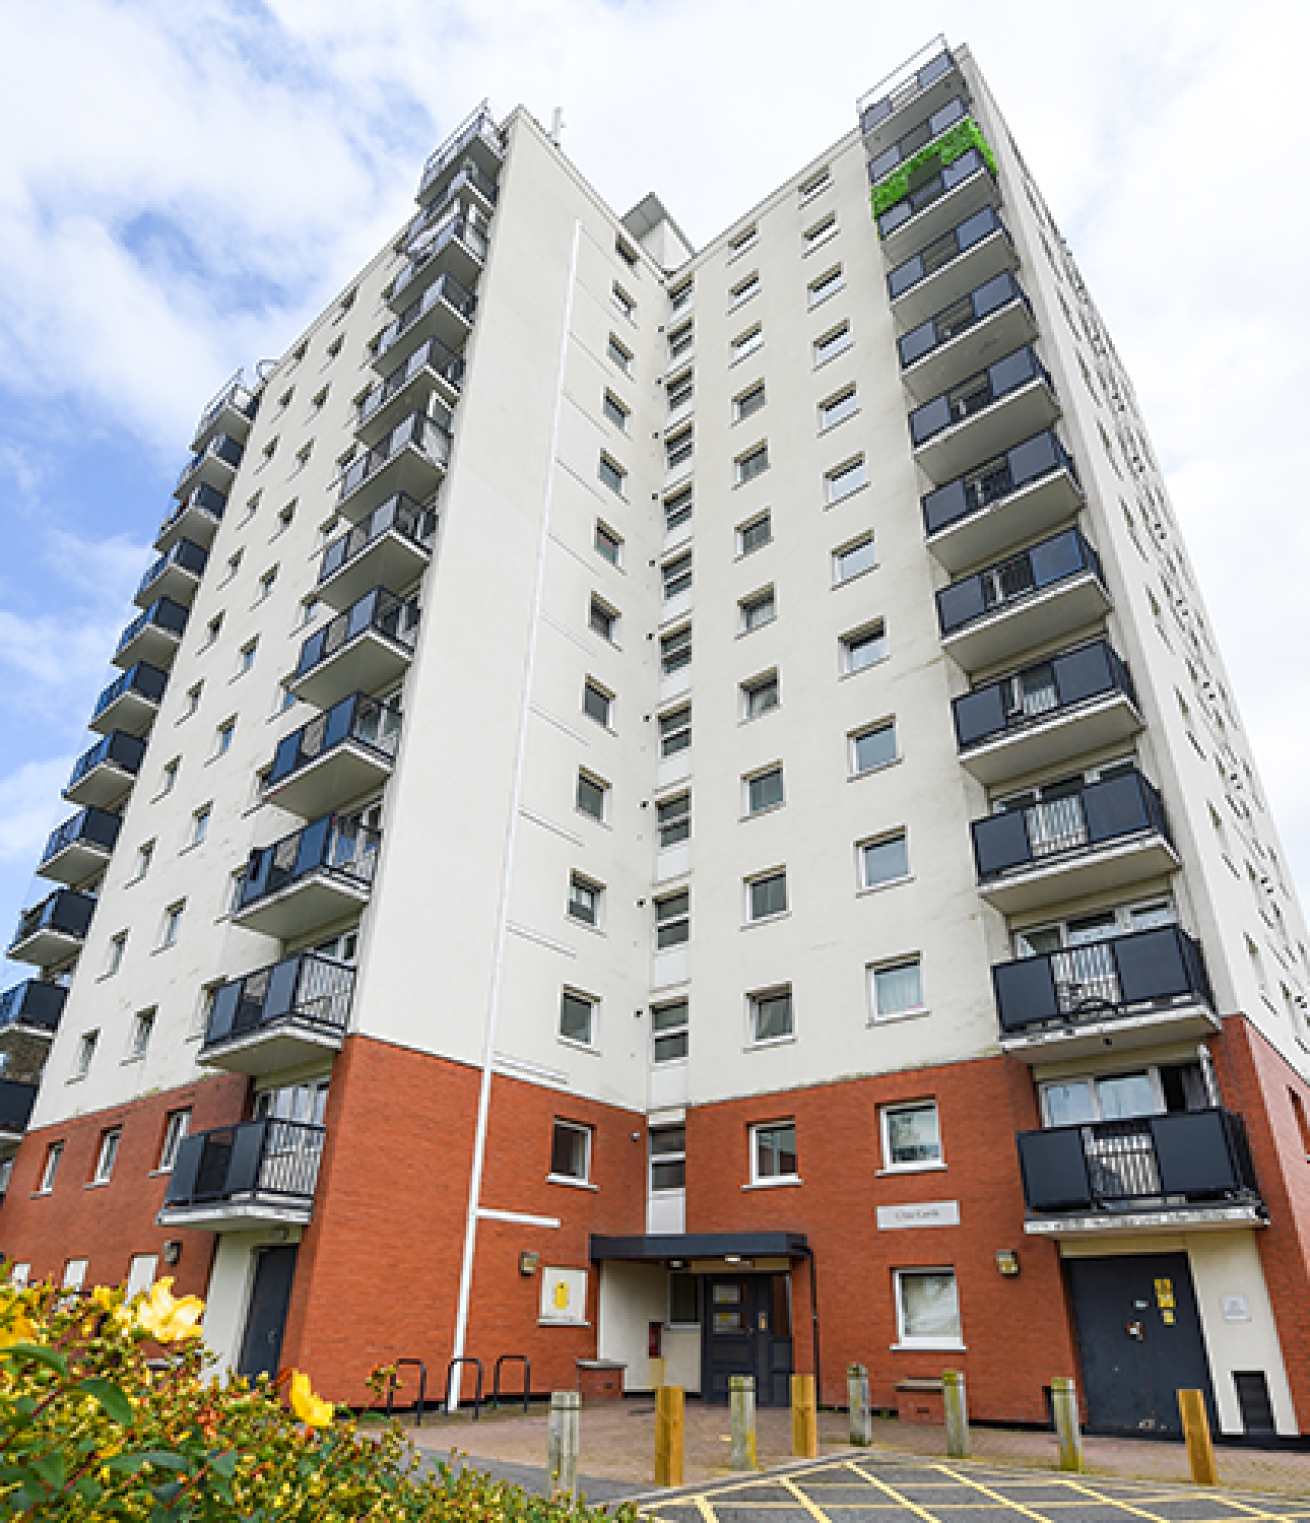 Exterior of the high rise accommodation at Glyn Garth